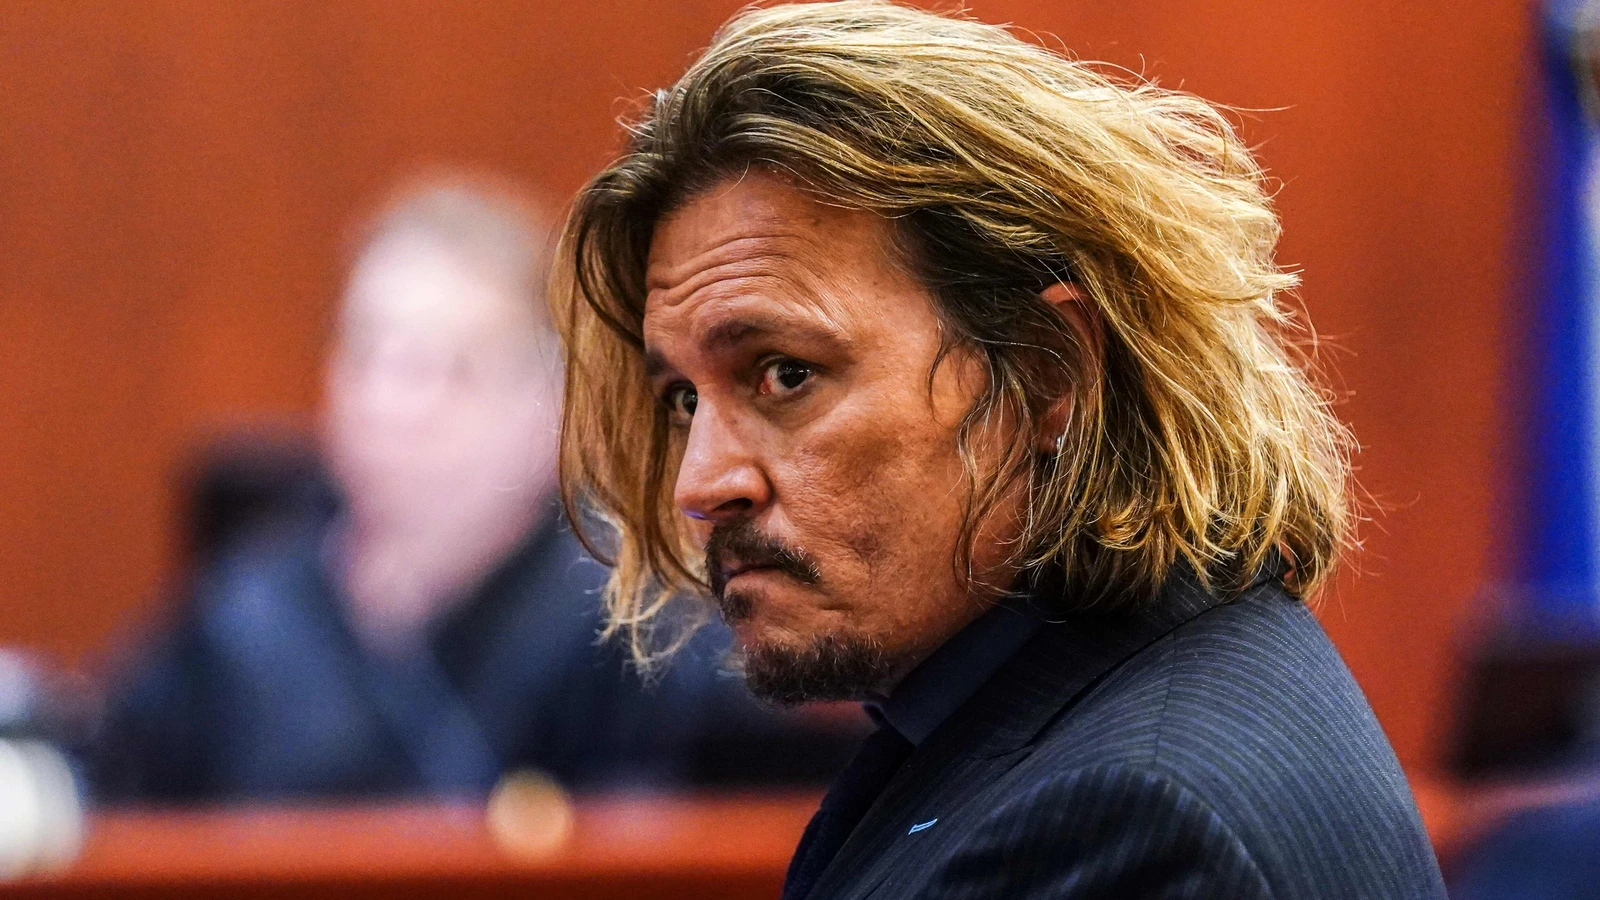 Actor Johnny Depp in the court hearing